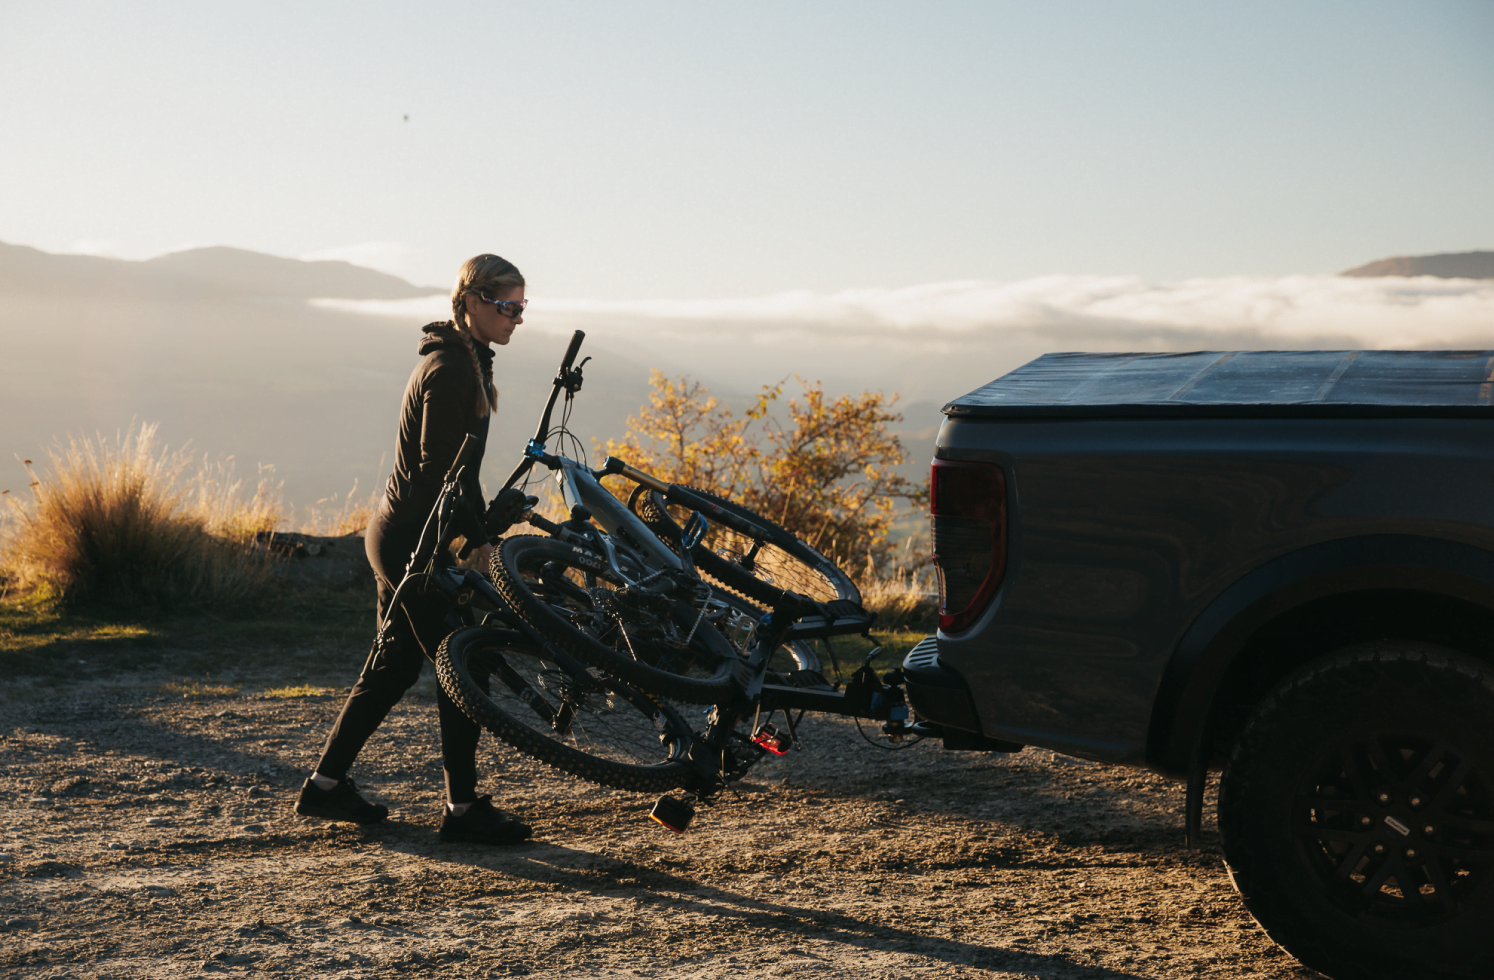 A woman tilts the Ezigrip E-Rack 2 on the back of her ute. The bike rack has two emtbs strapped in and she tilts them along with the rack.